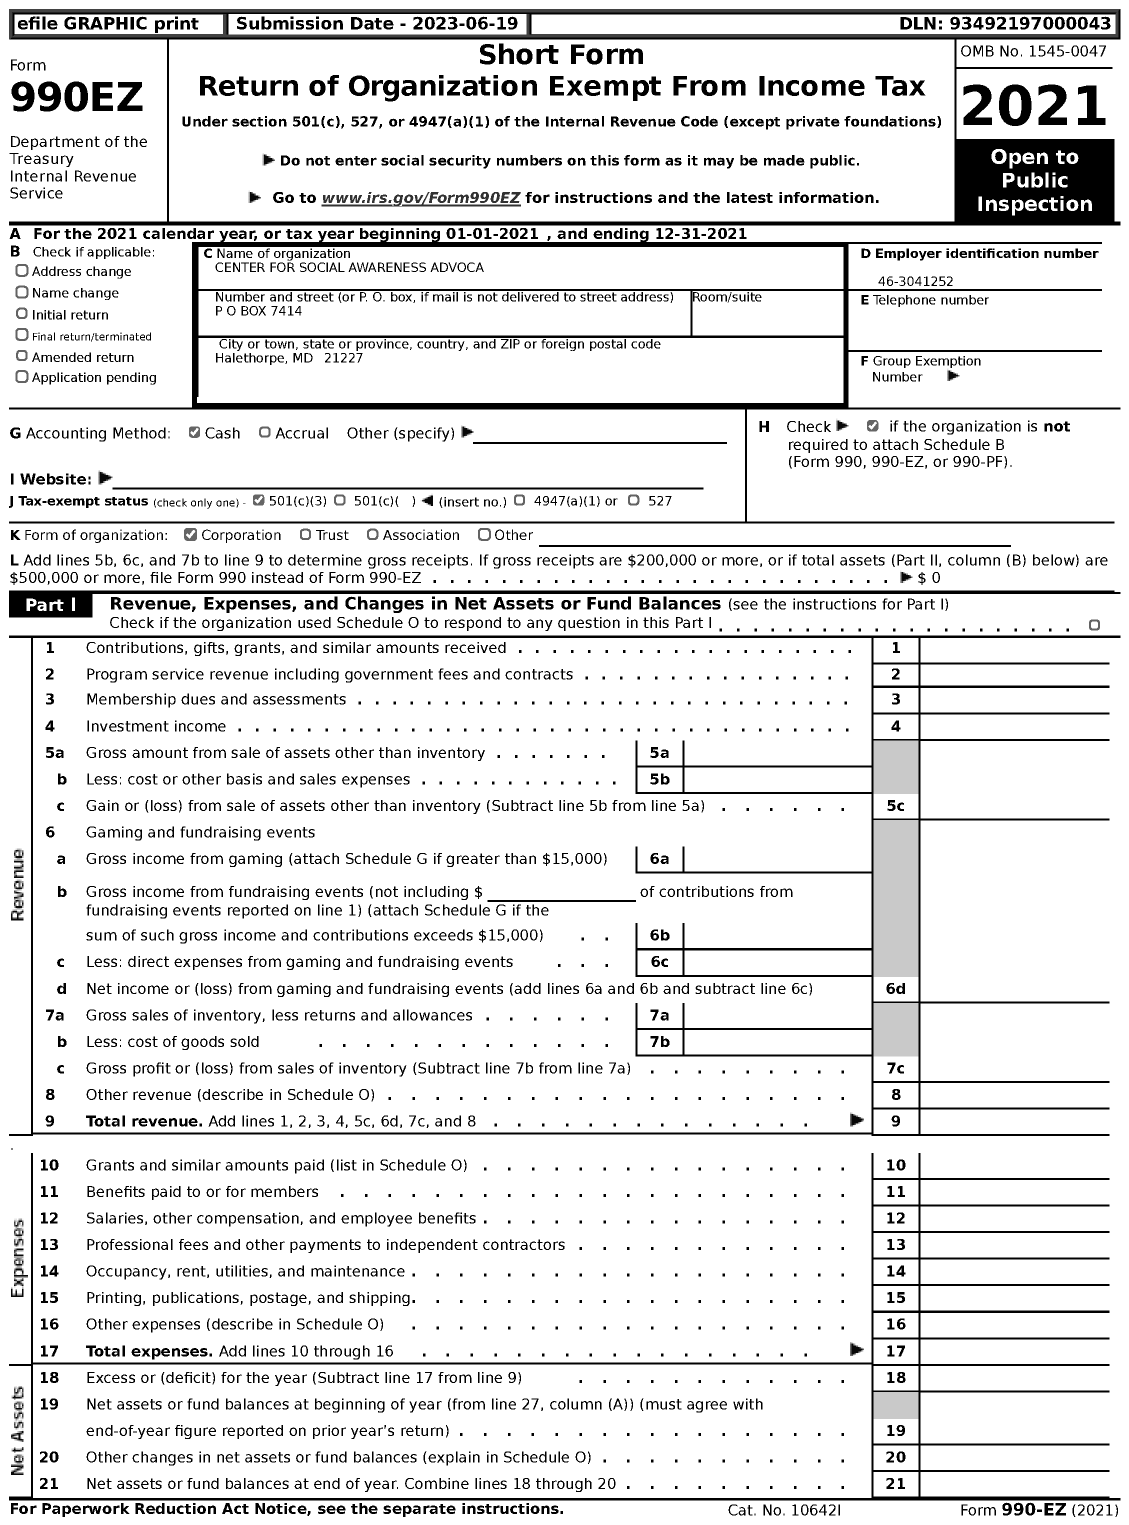 Image of first page of 2021 Form 990EZ for Center for Social Awareness Advocacy